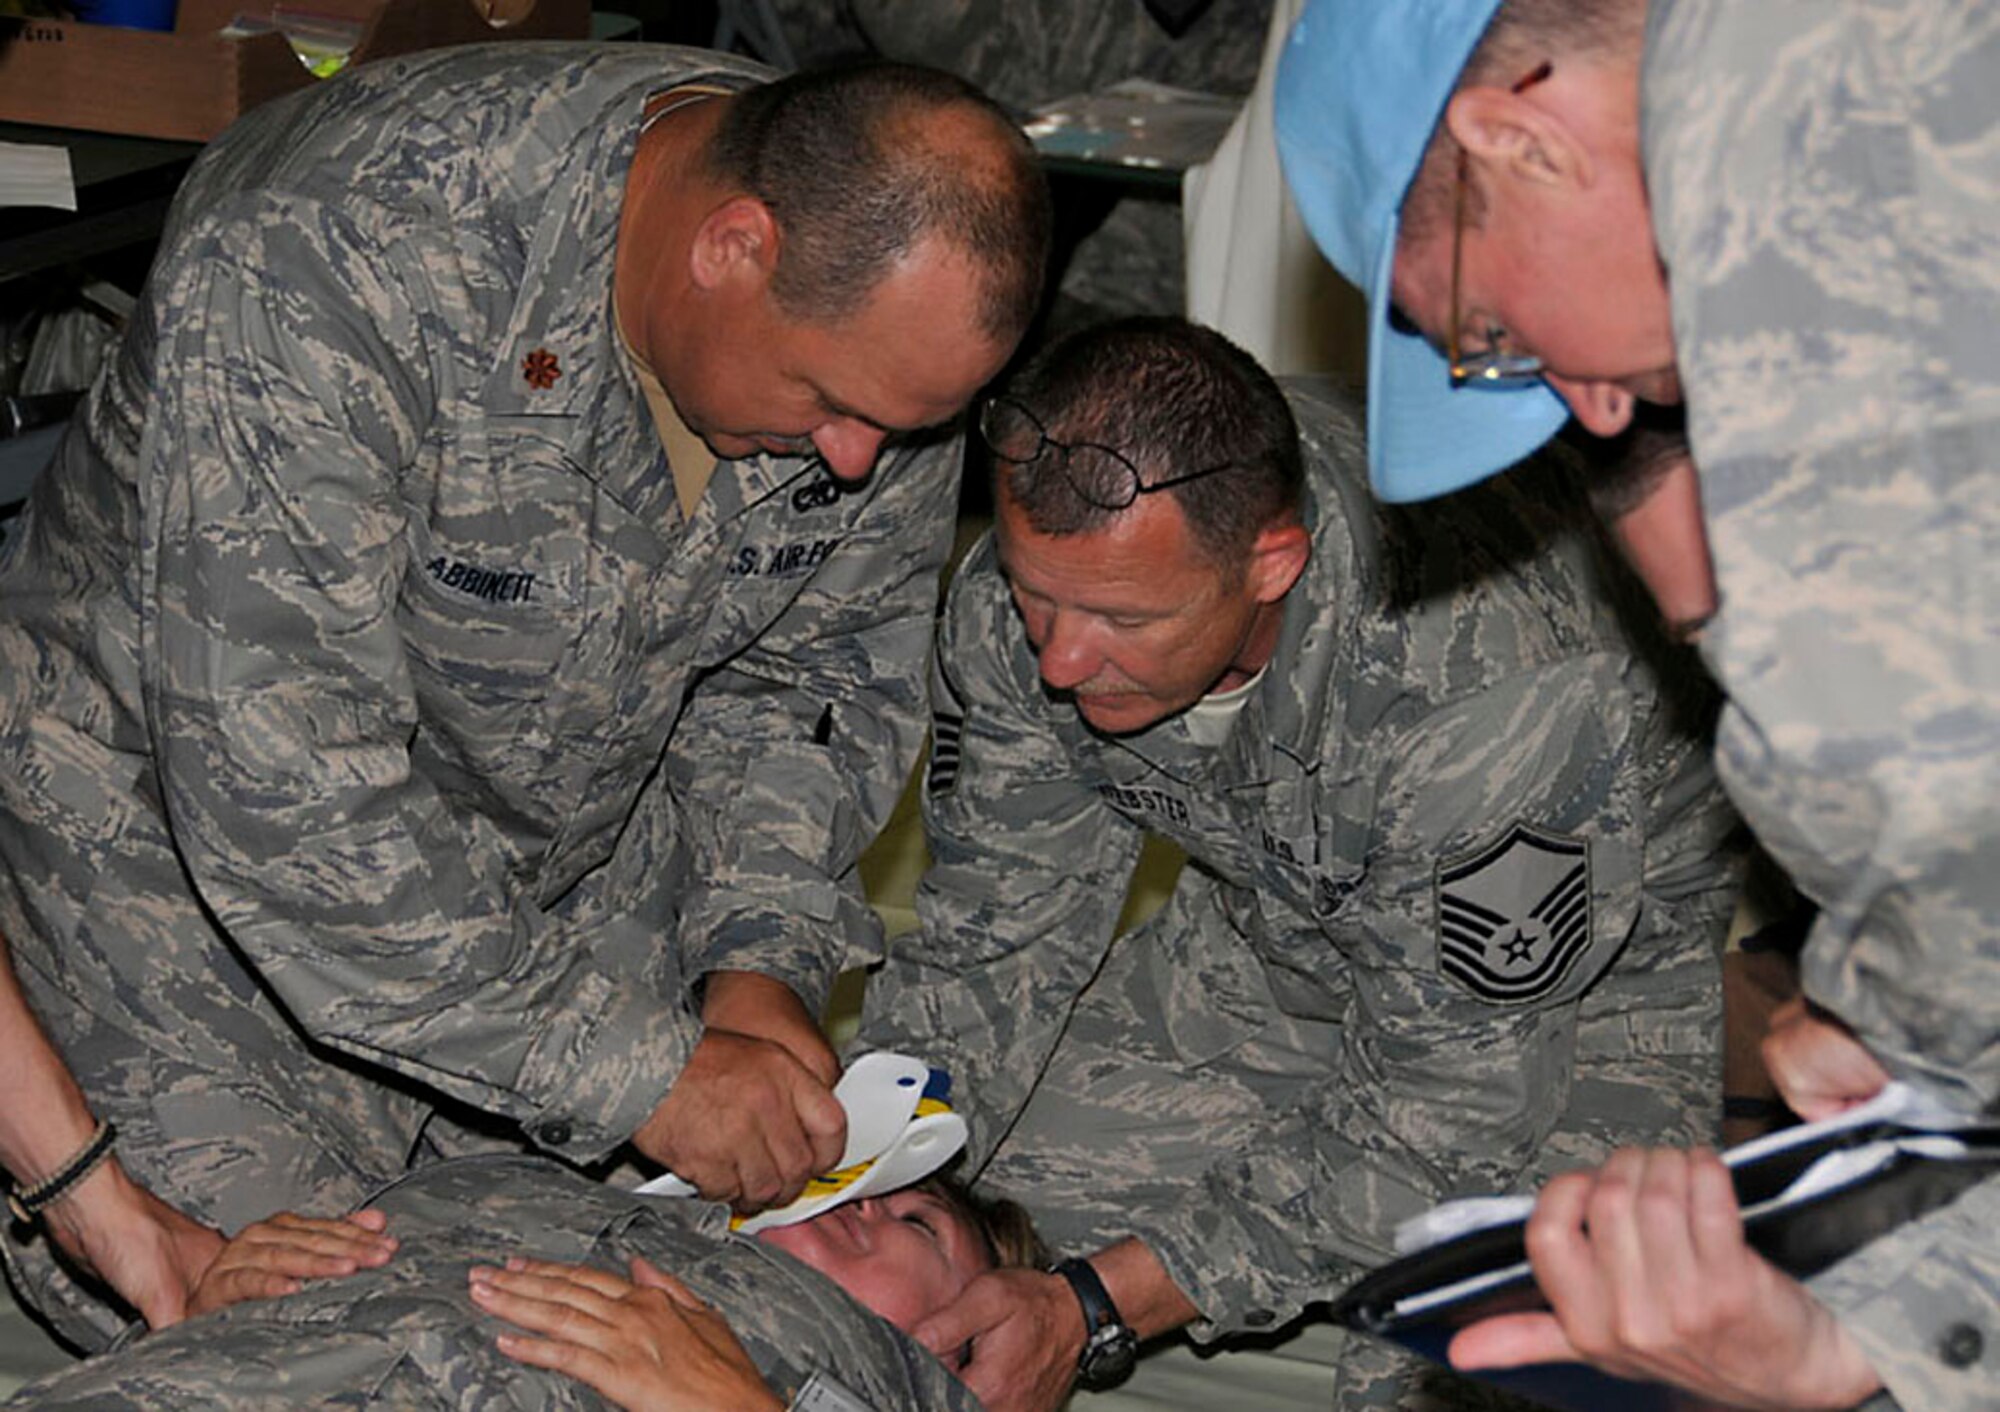 Maj. Abbinett (left) and Master Sgt. Webster (center), place a C collar around the neck of a patient during the exercise. Photo by Master Sgt. John Day